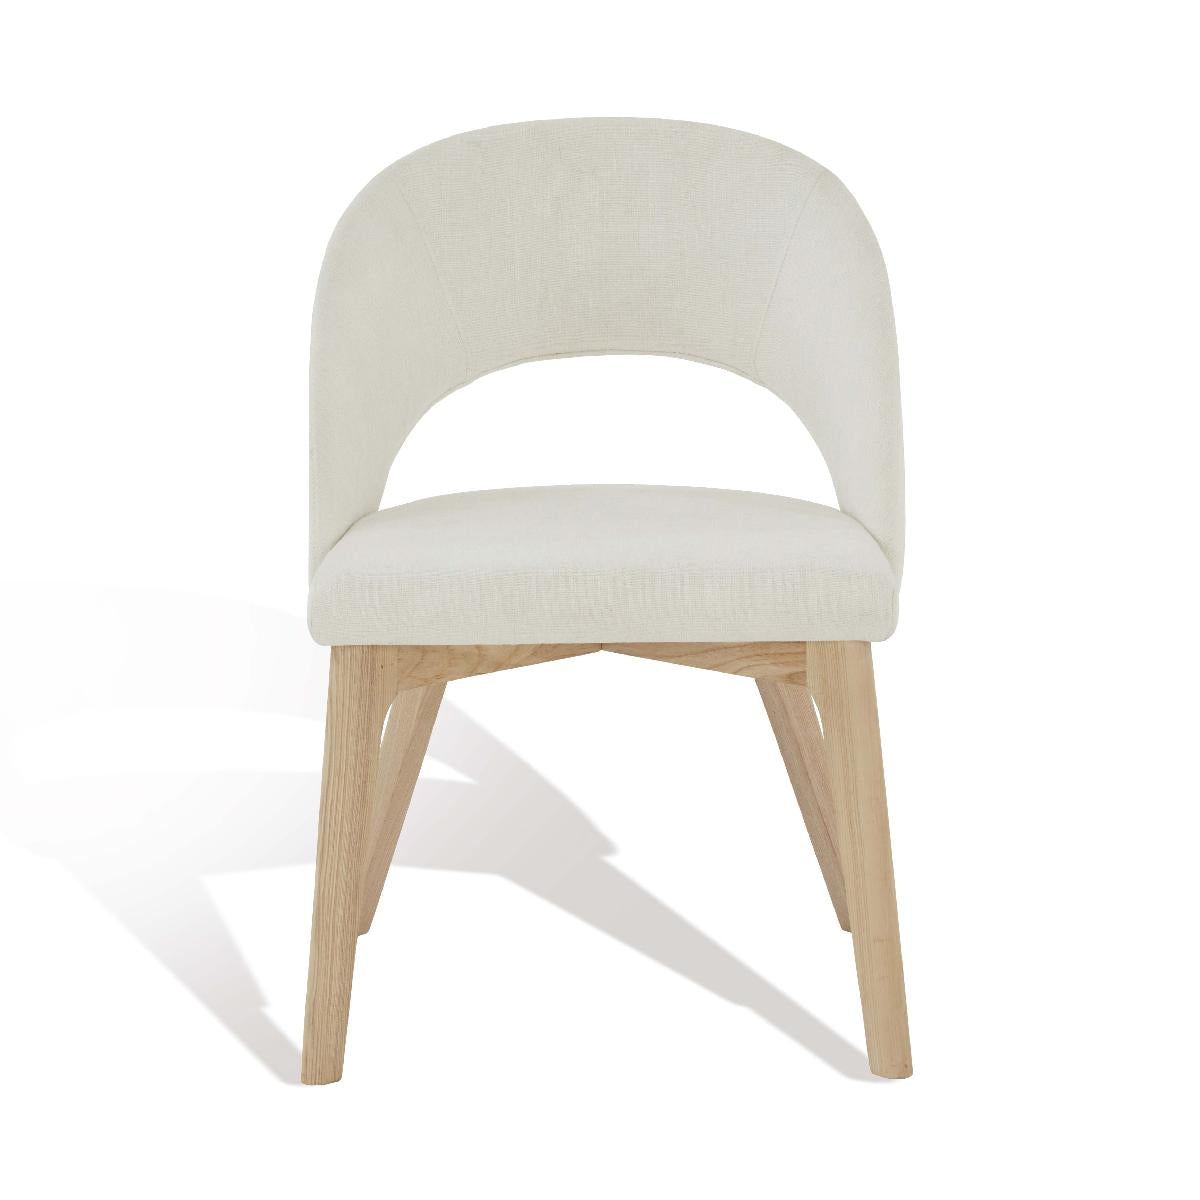 Safavieh Couture Rowland Linen Dining Chair